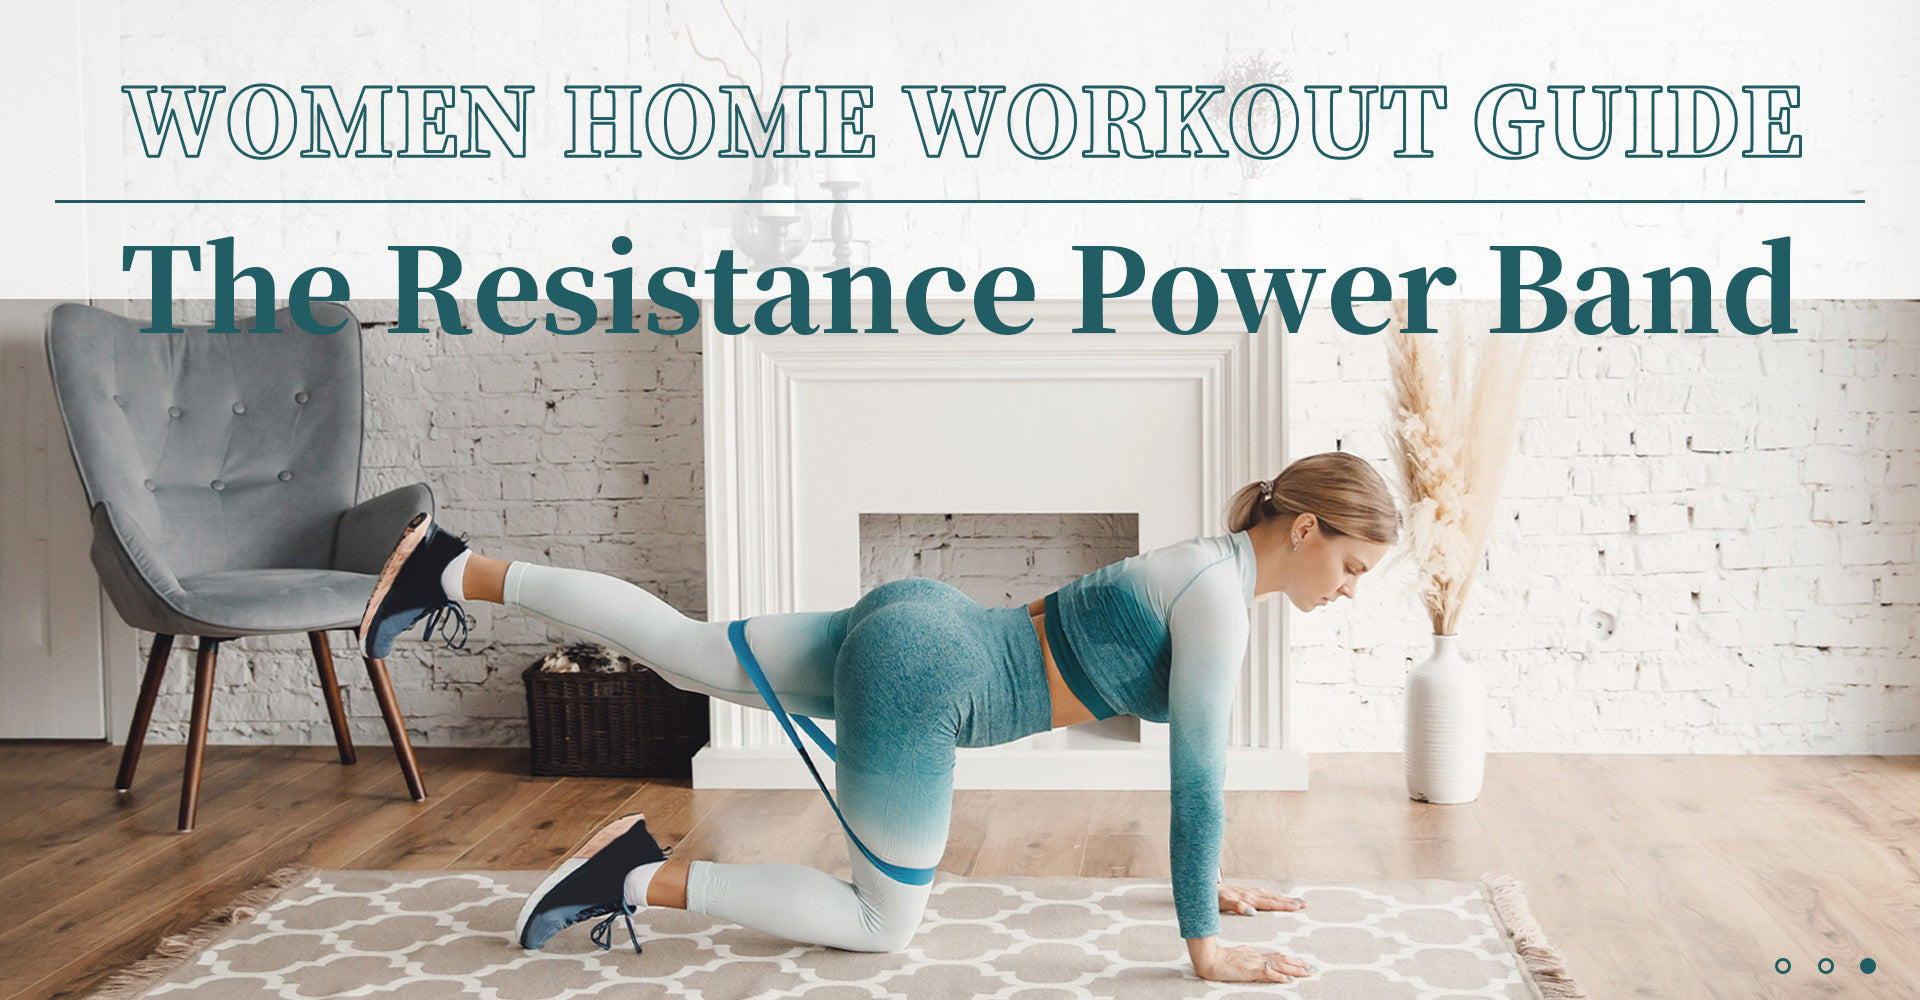 Women Home Workout Guide-The Resistance Power Band